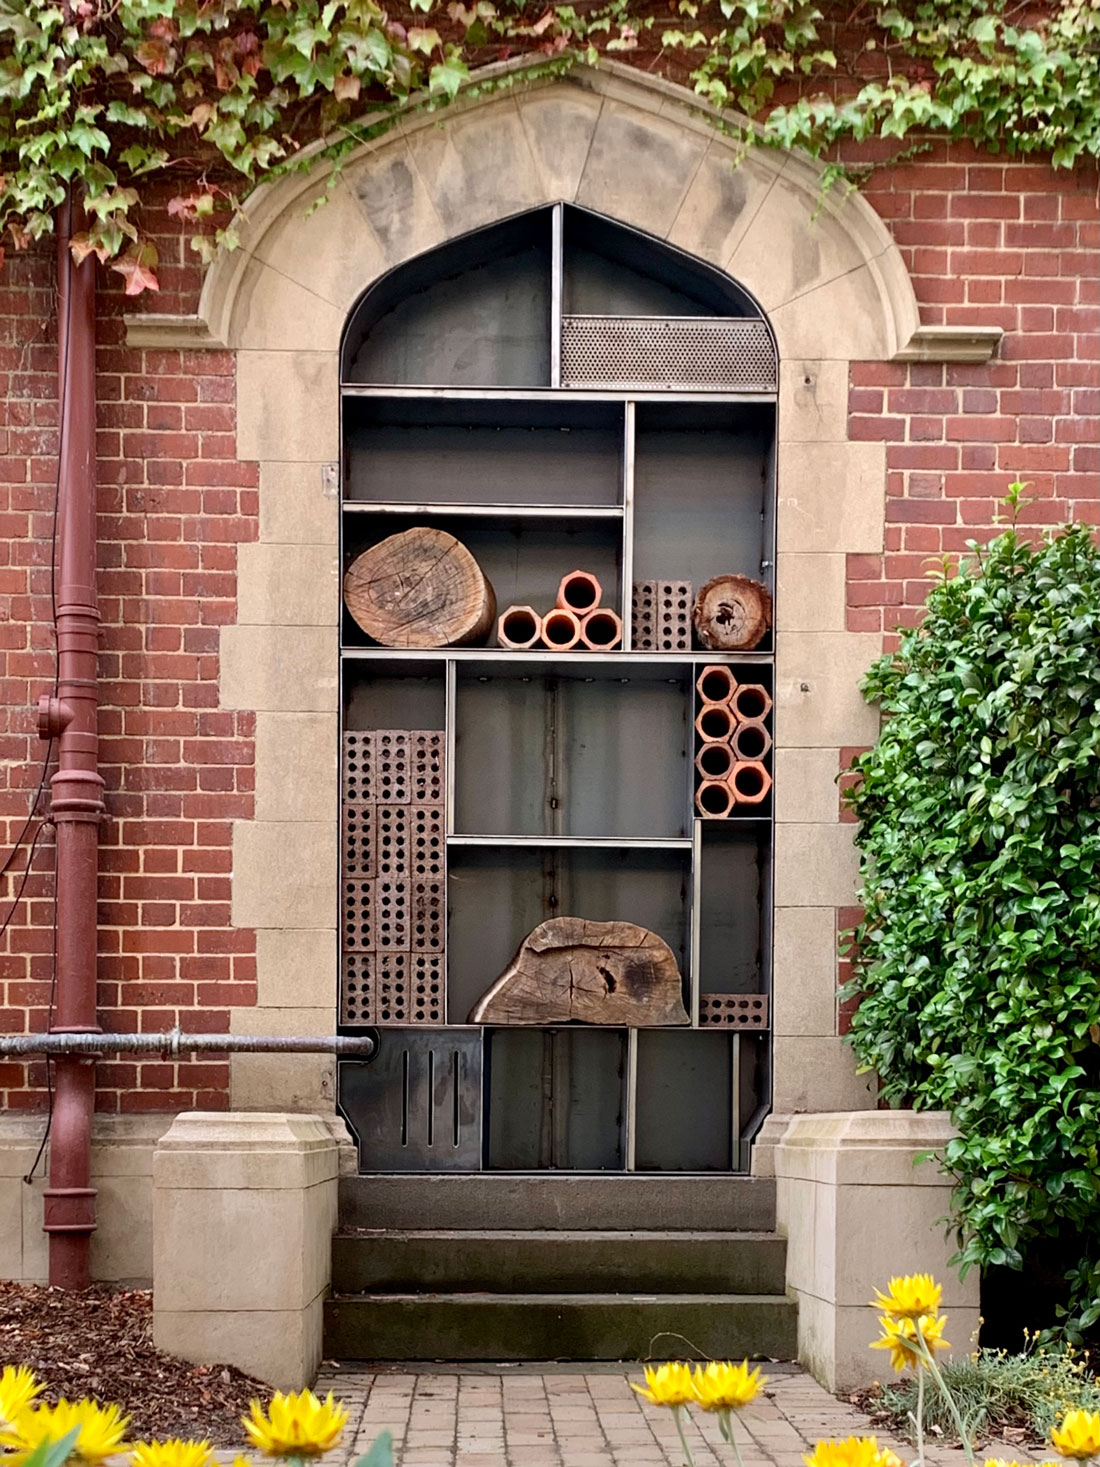 Photo of a brick doorway with stairs leading up. The doorway is fitted with a steel frame divided into sections with a few larger logs and bricks sitting in some sections